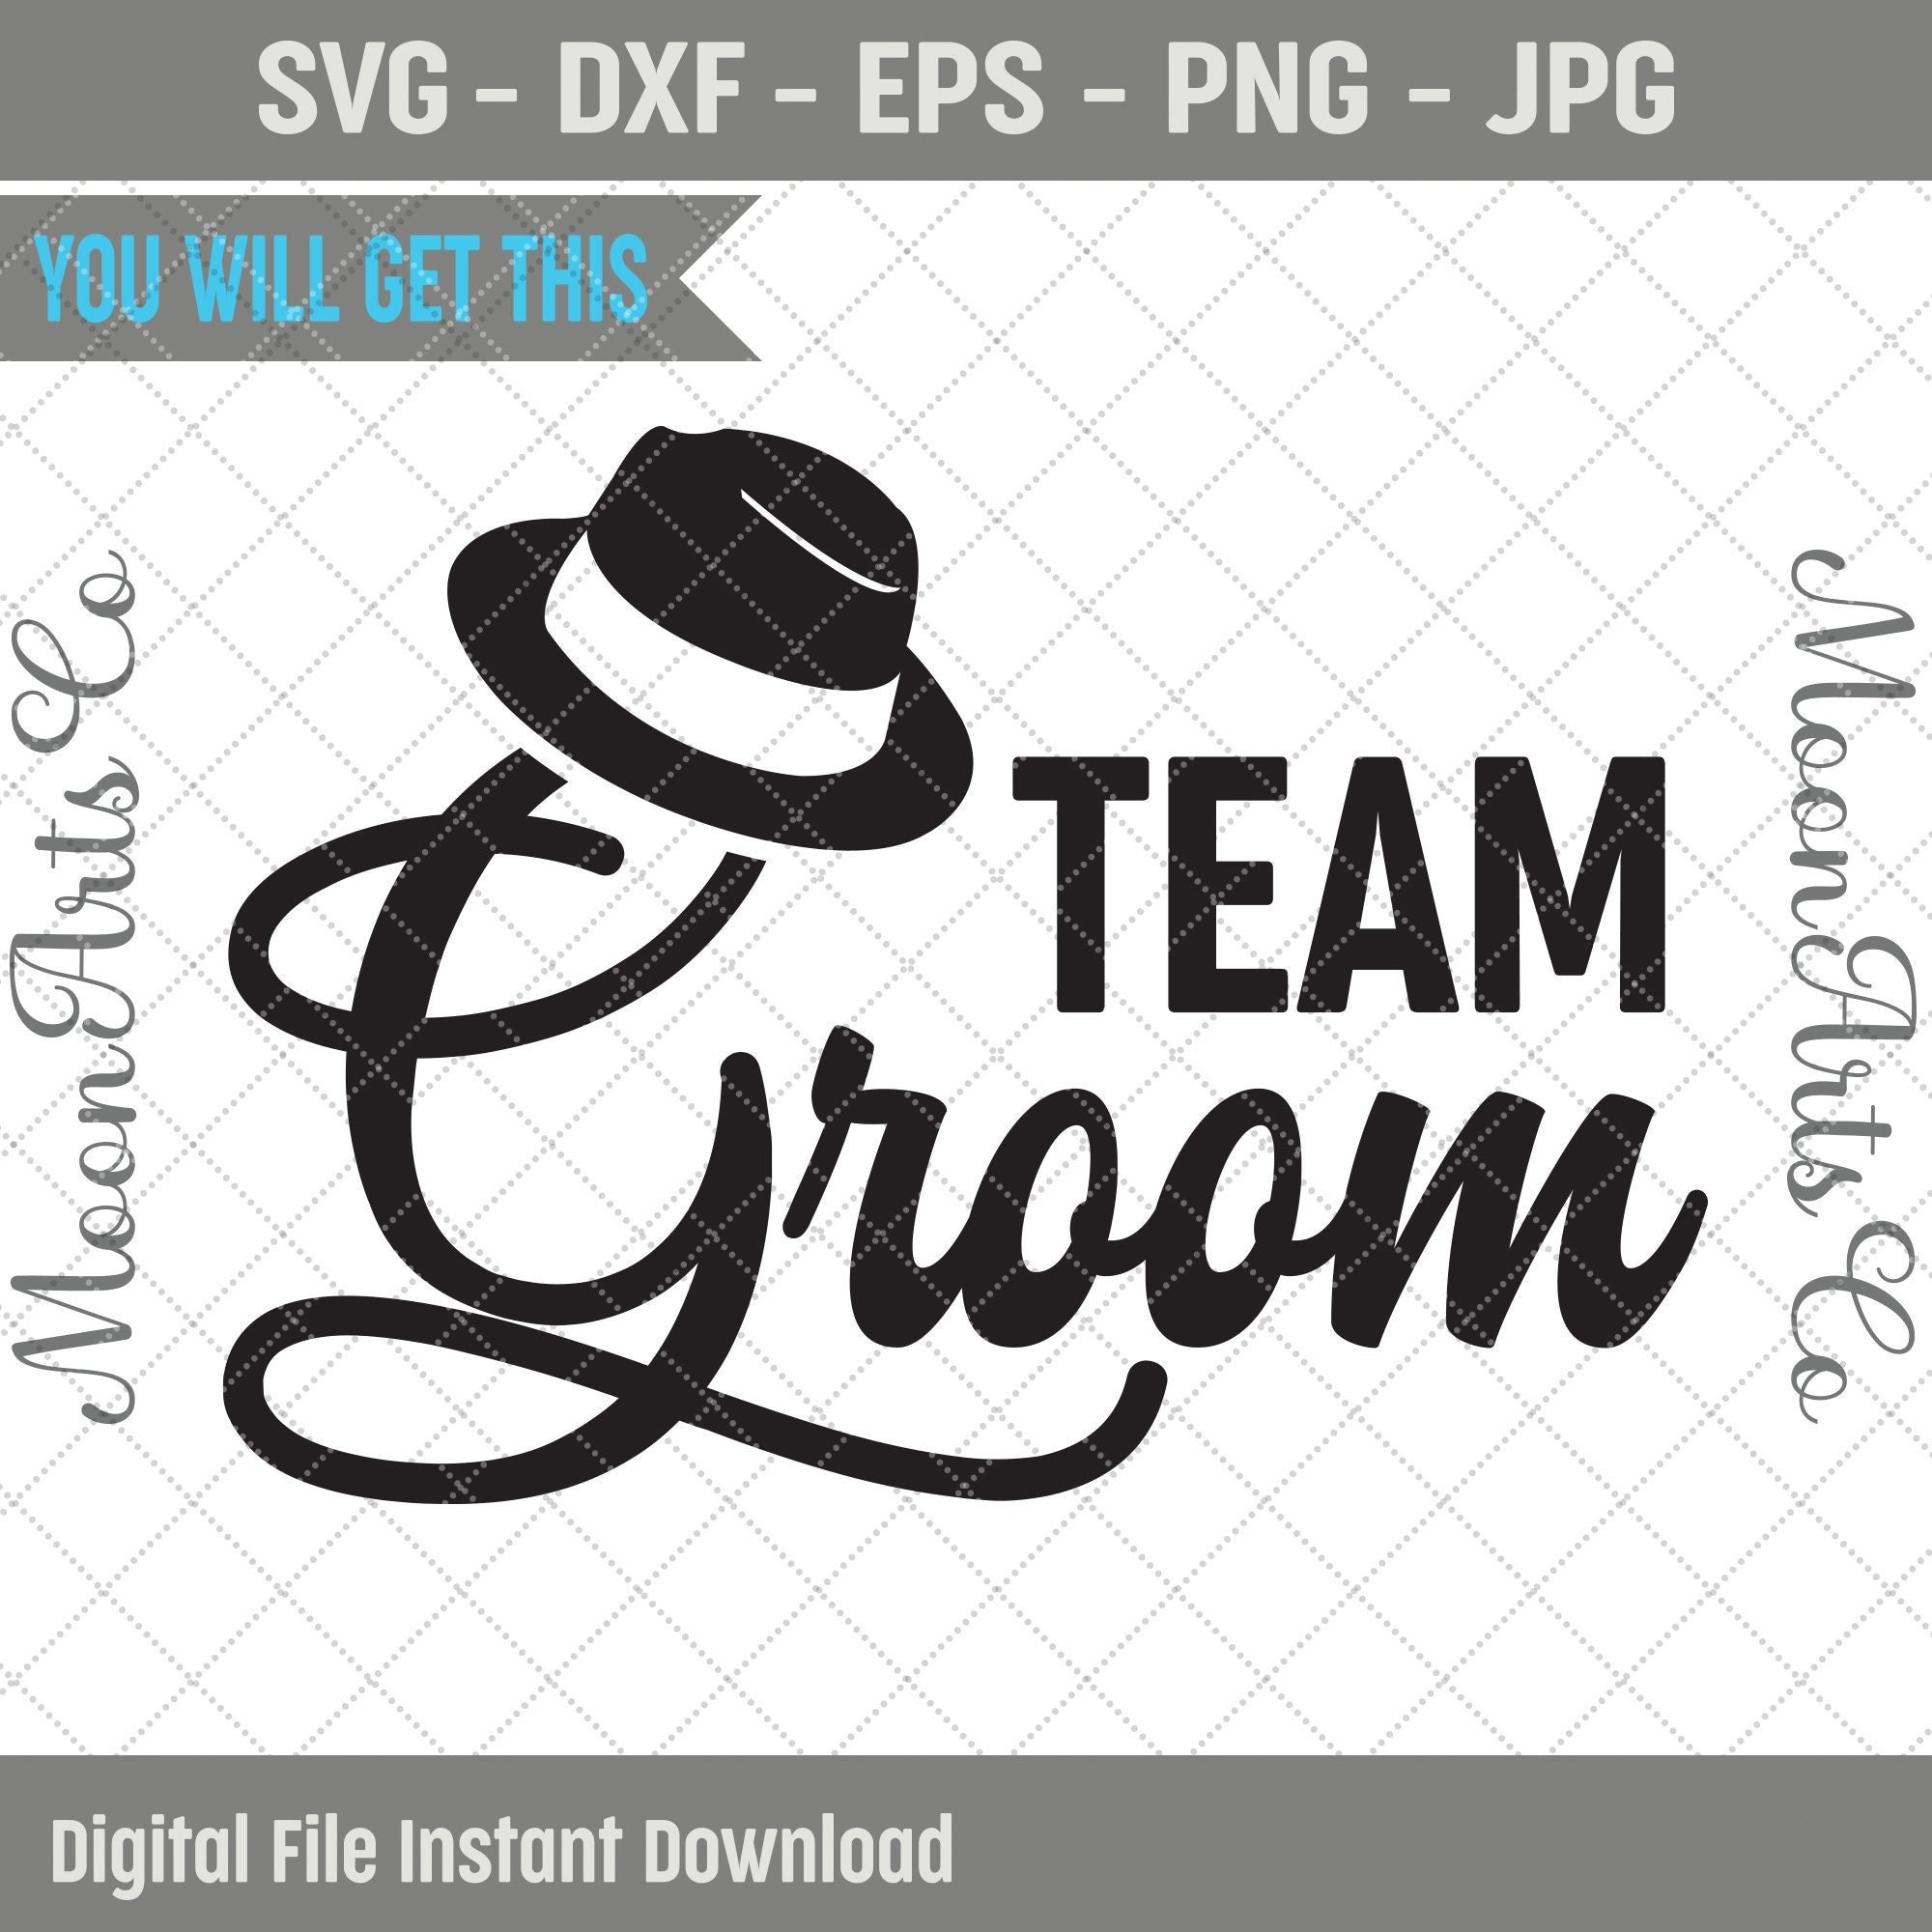 Bachelor Party Svg I Do Crew Svg Groom Party Svg Groom Squad Svg Groom Crew Svg Groom Cut File Groom Svg Groom Crew SVG